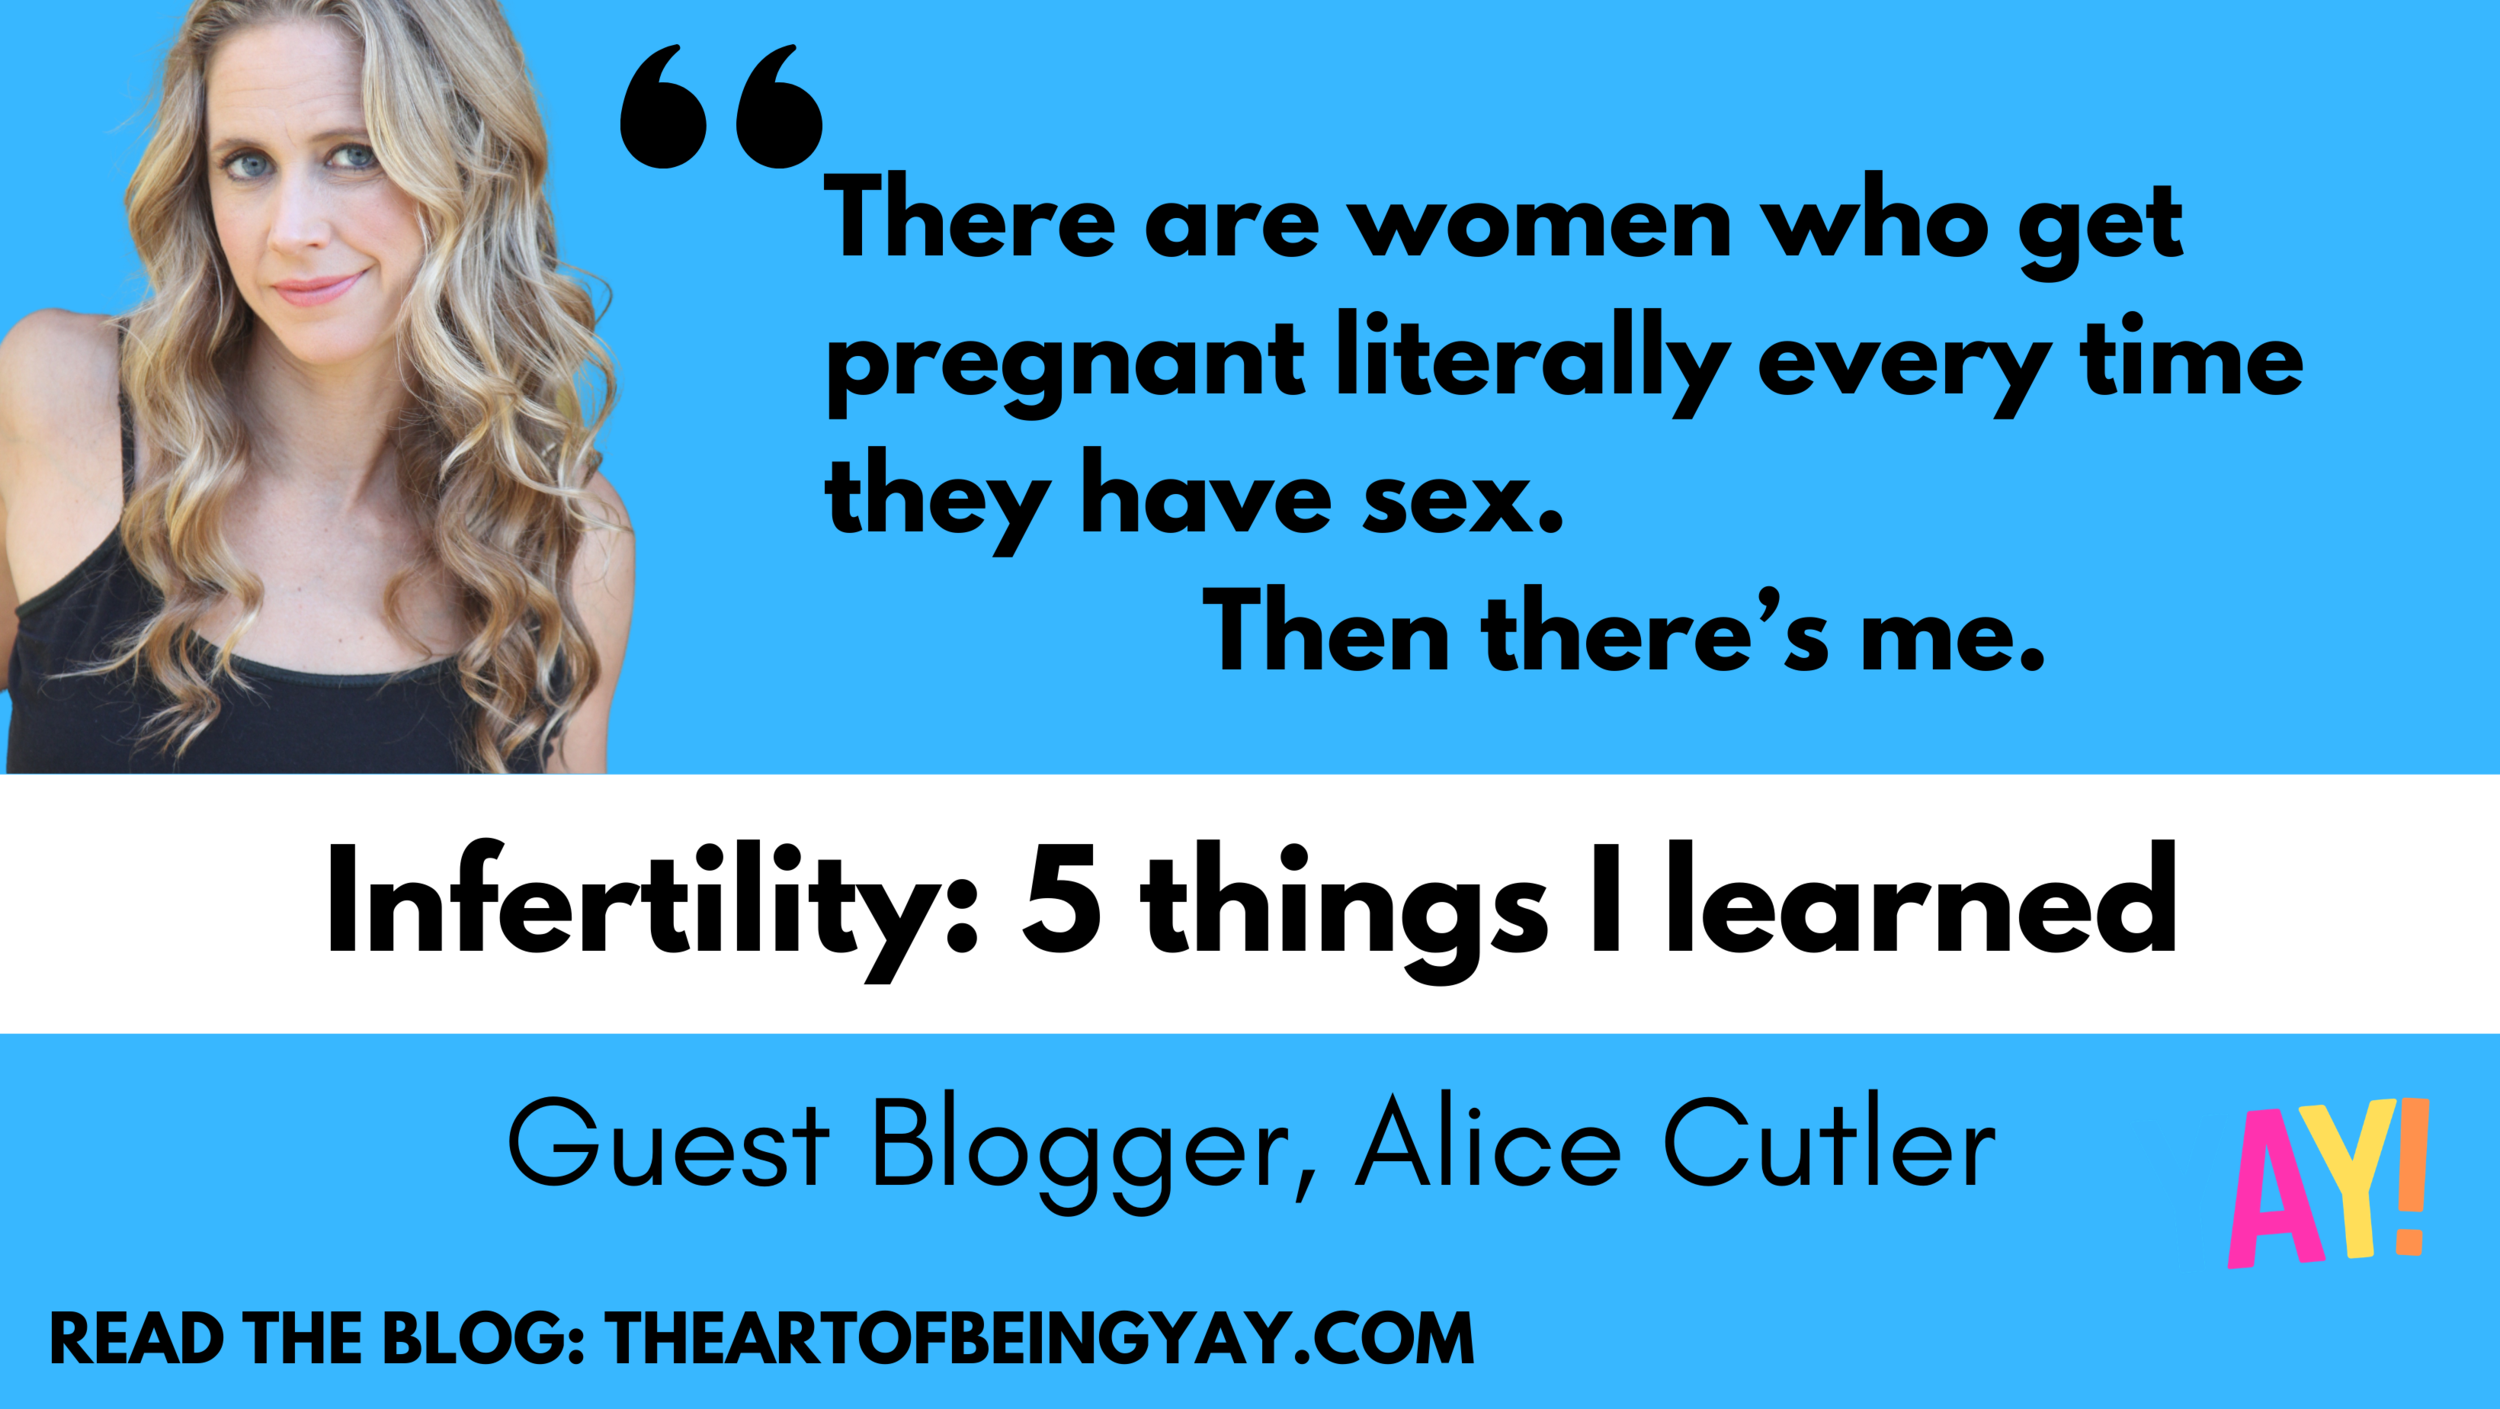 One comedian's Stand Up to Infertility!